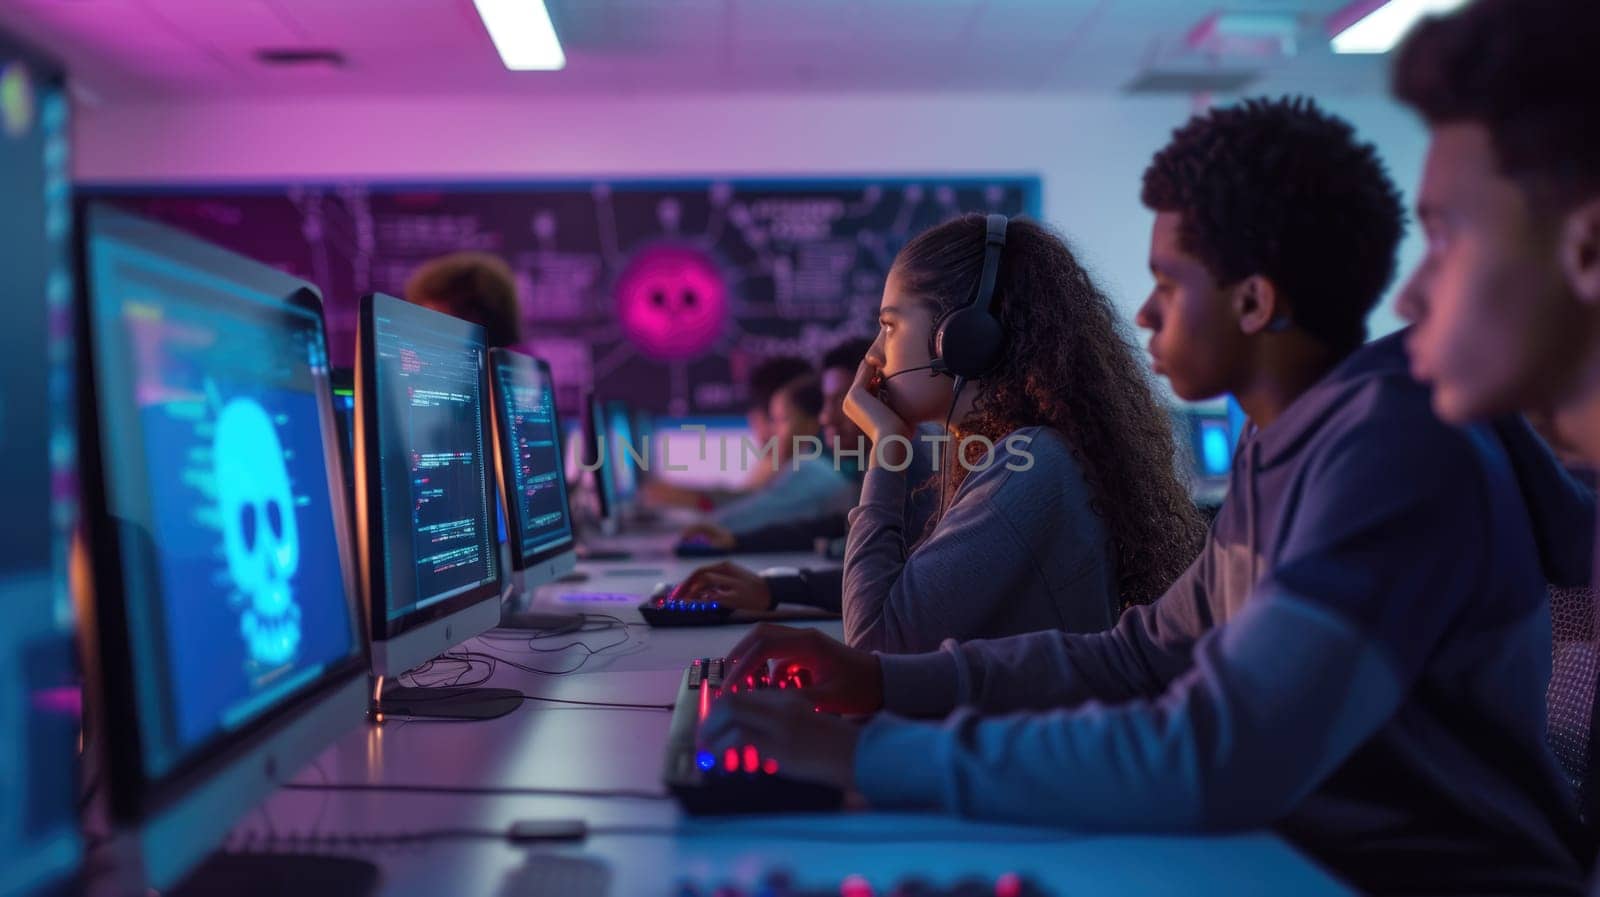 A group of people are sitting in front of computer monitors in a computer lab AIG41 by biancoblue